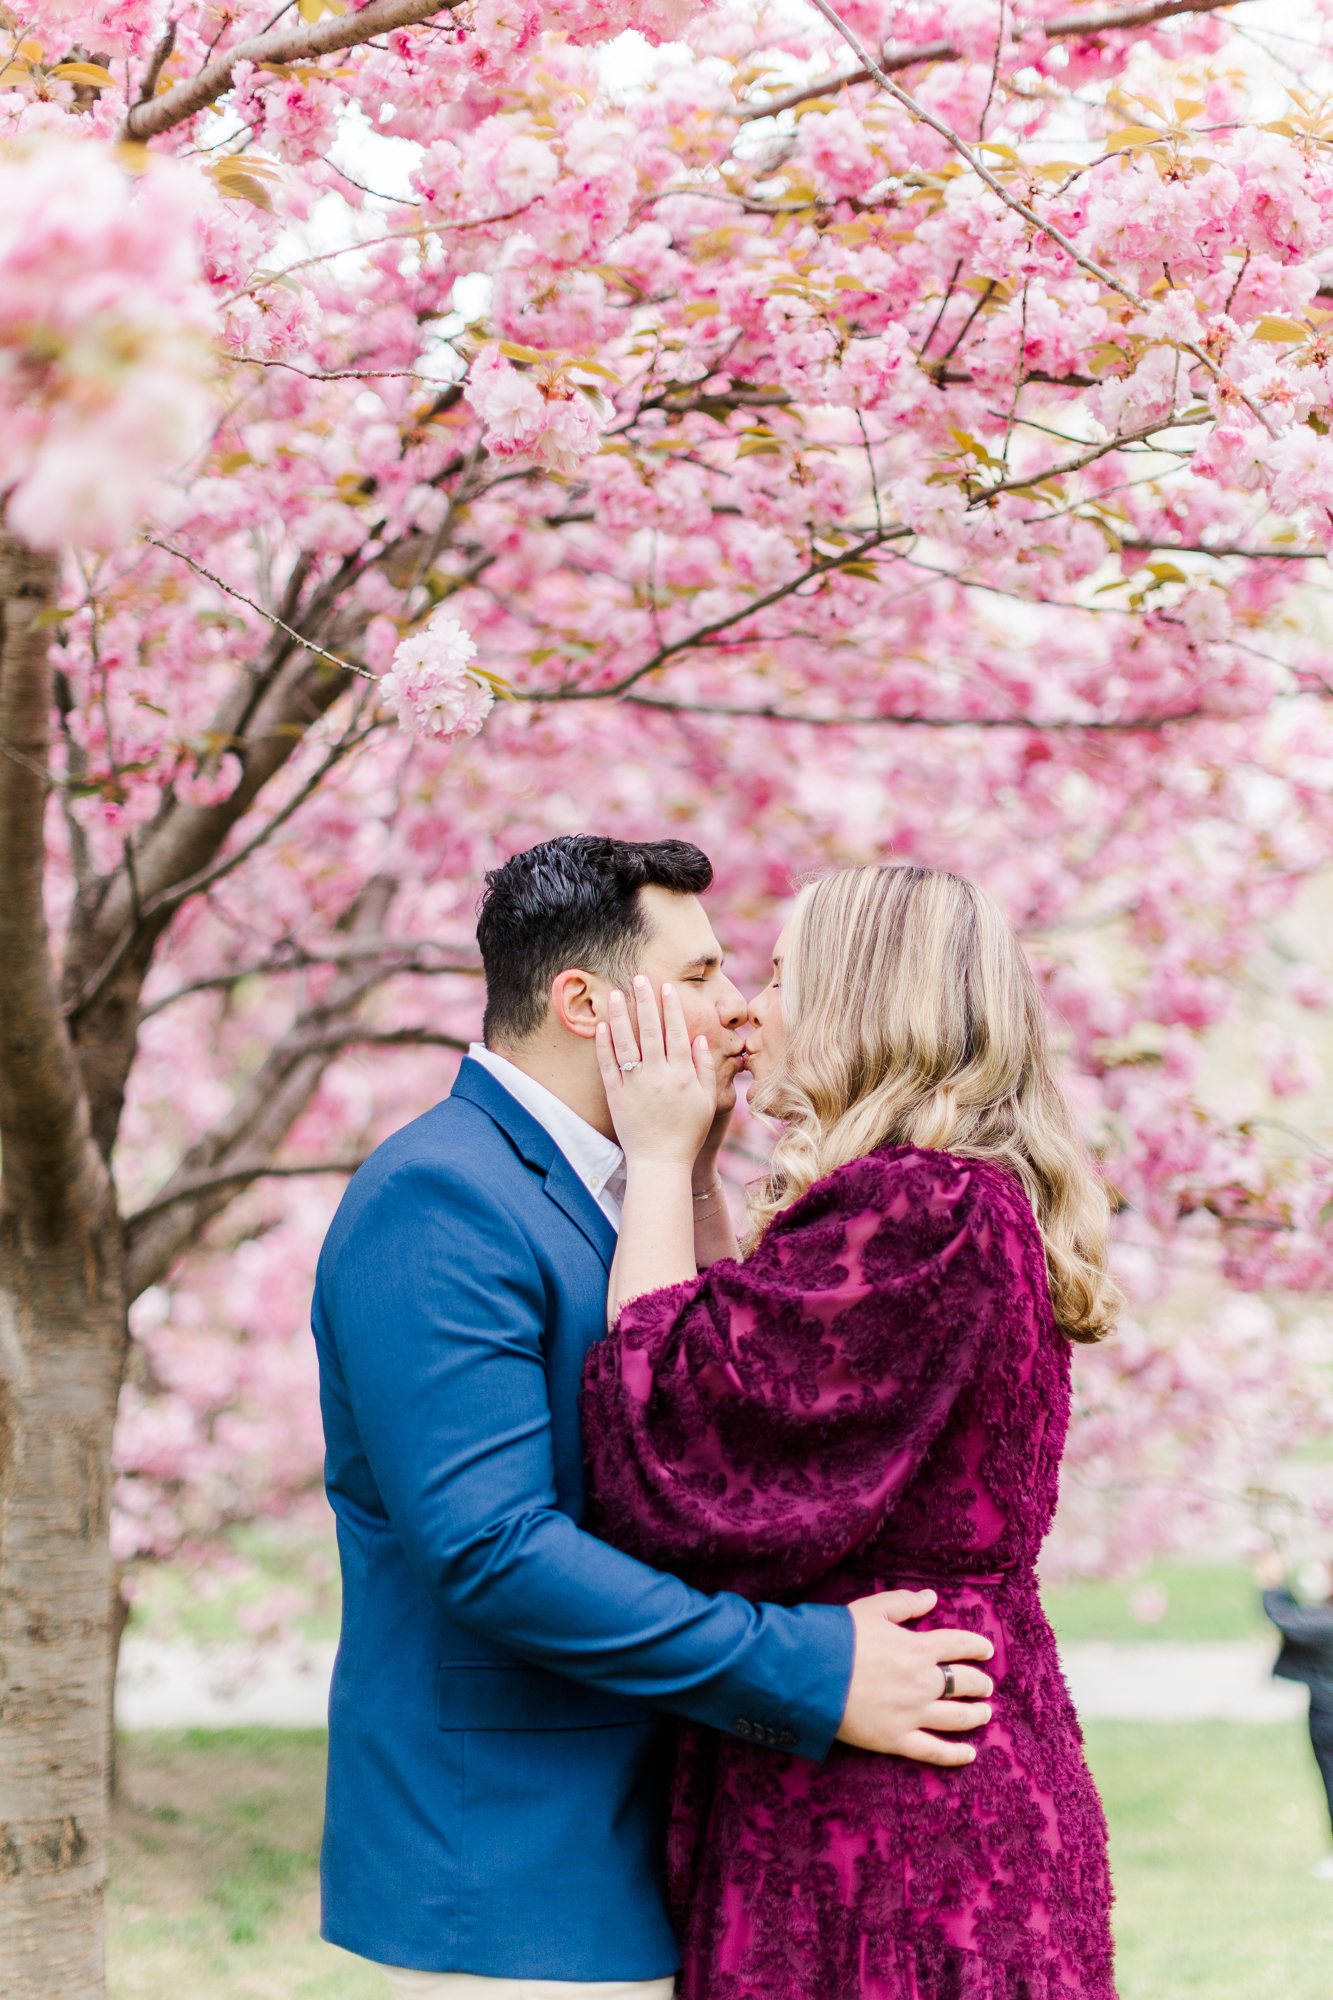 Fun Engagement Photos in NYC